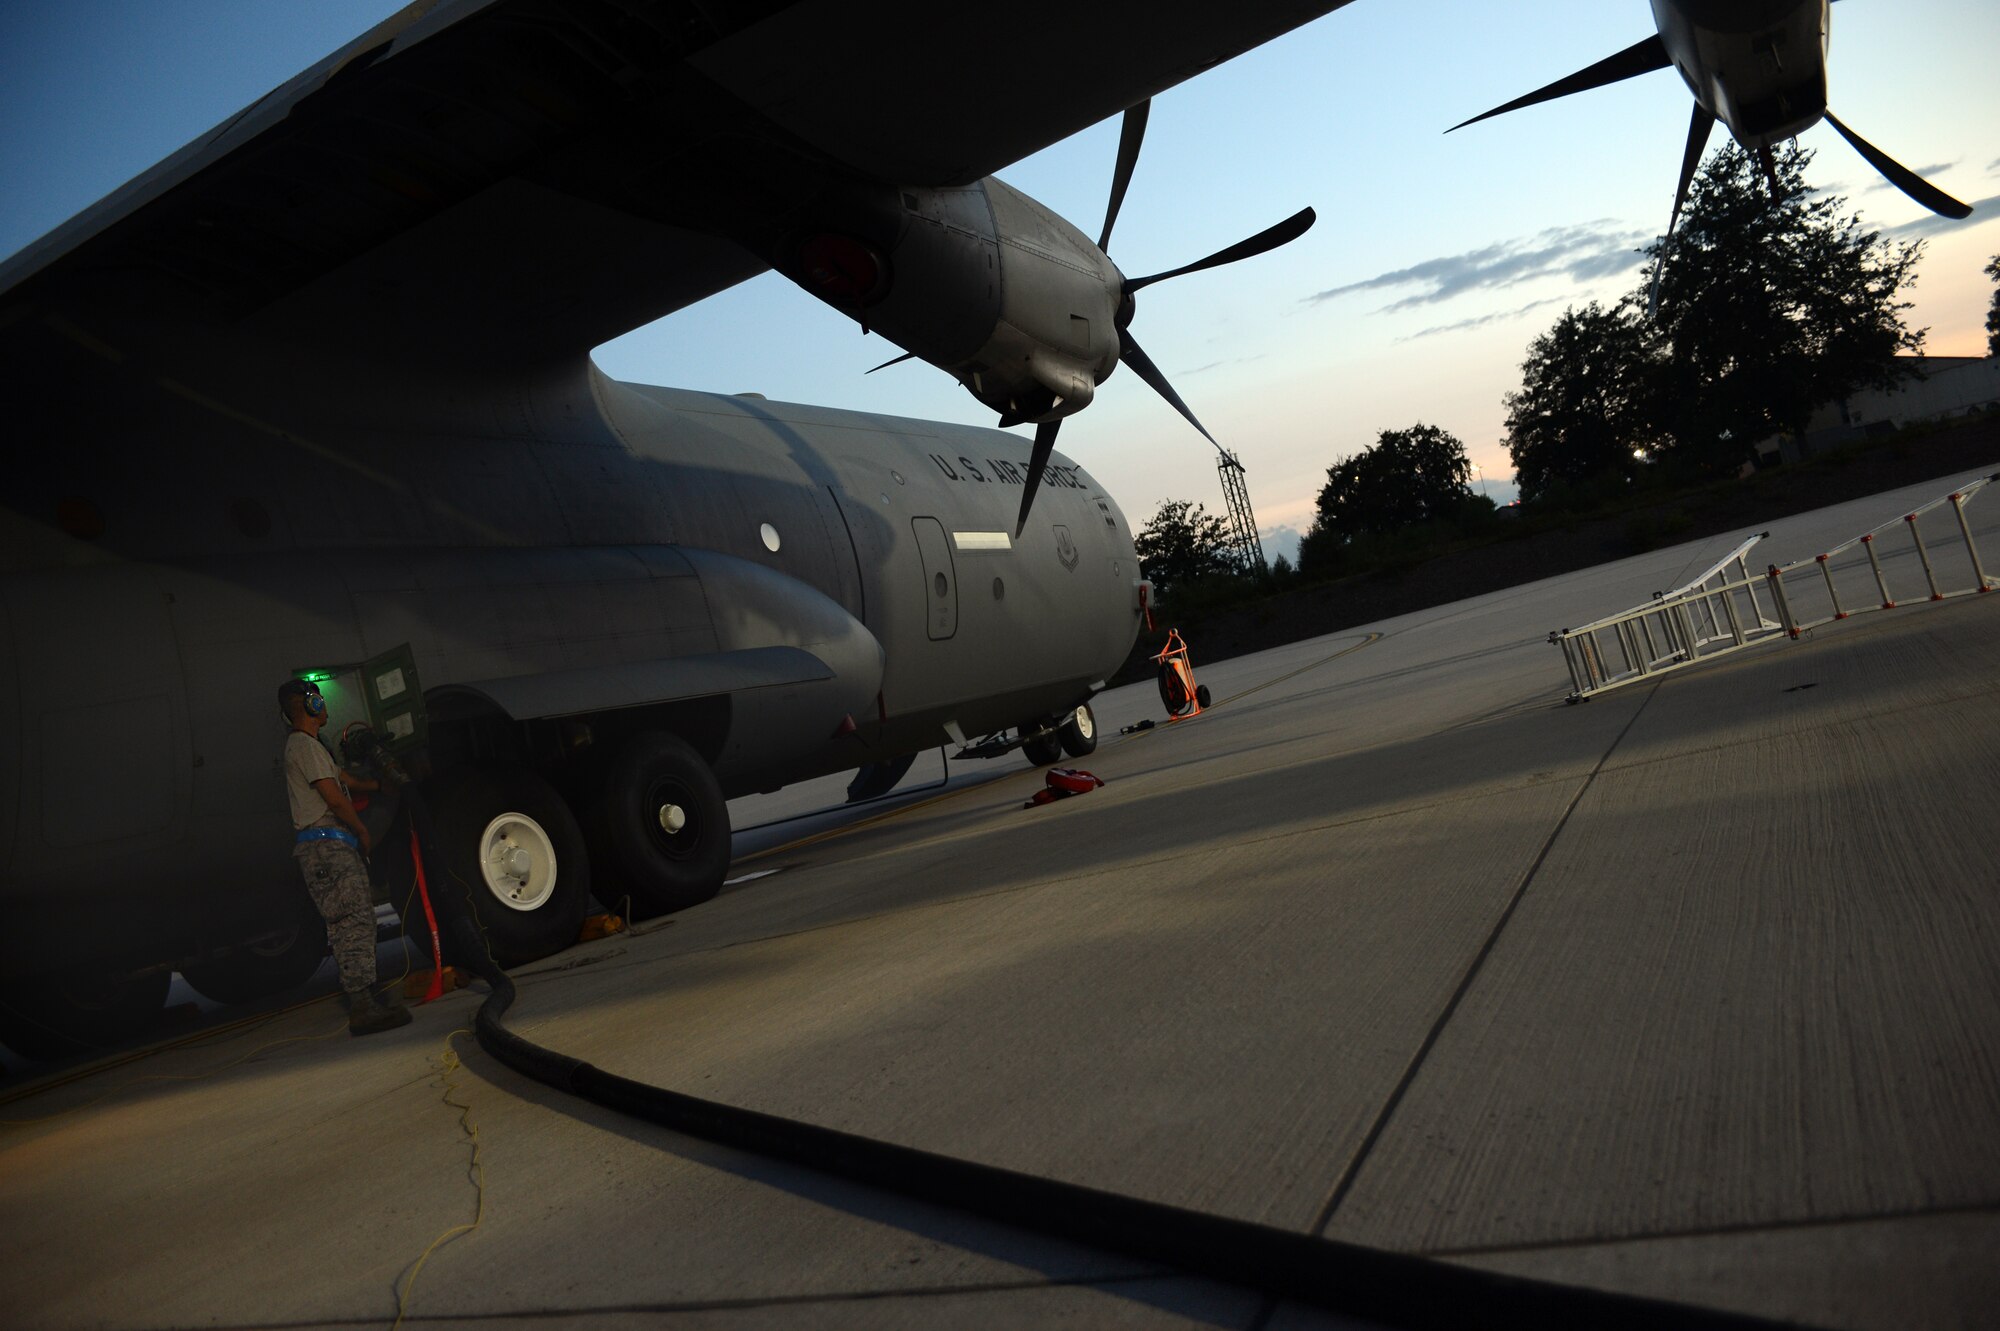 Staff Sgt. Roscoe Tamondong, 86th Aircraft Maintenance Squadron flight crew chief, refuels a C-130J Super Hercules, July 29, 2013, Ramstein Air Base, Germany. 86th AMXS Airmen ensure all assigned aircraft are 100 percent combat ready prior to take off. (U.S. Air Force photo/Senior Airman Caitlin Guinazu)